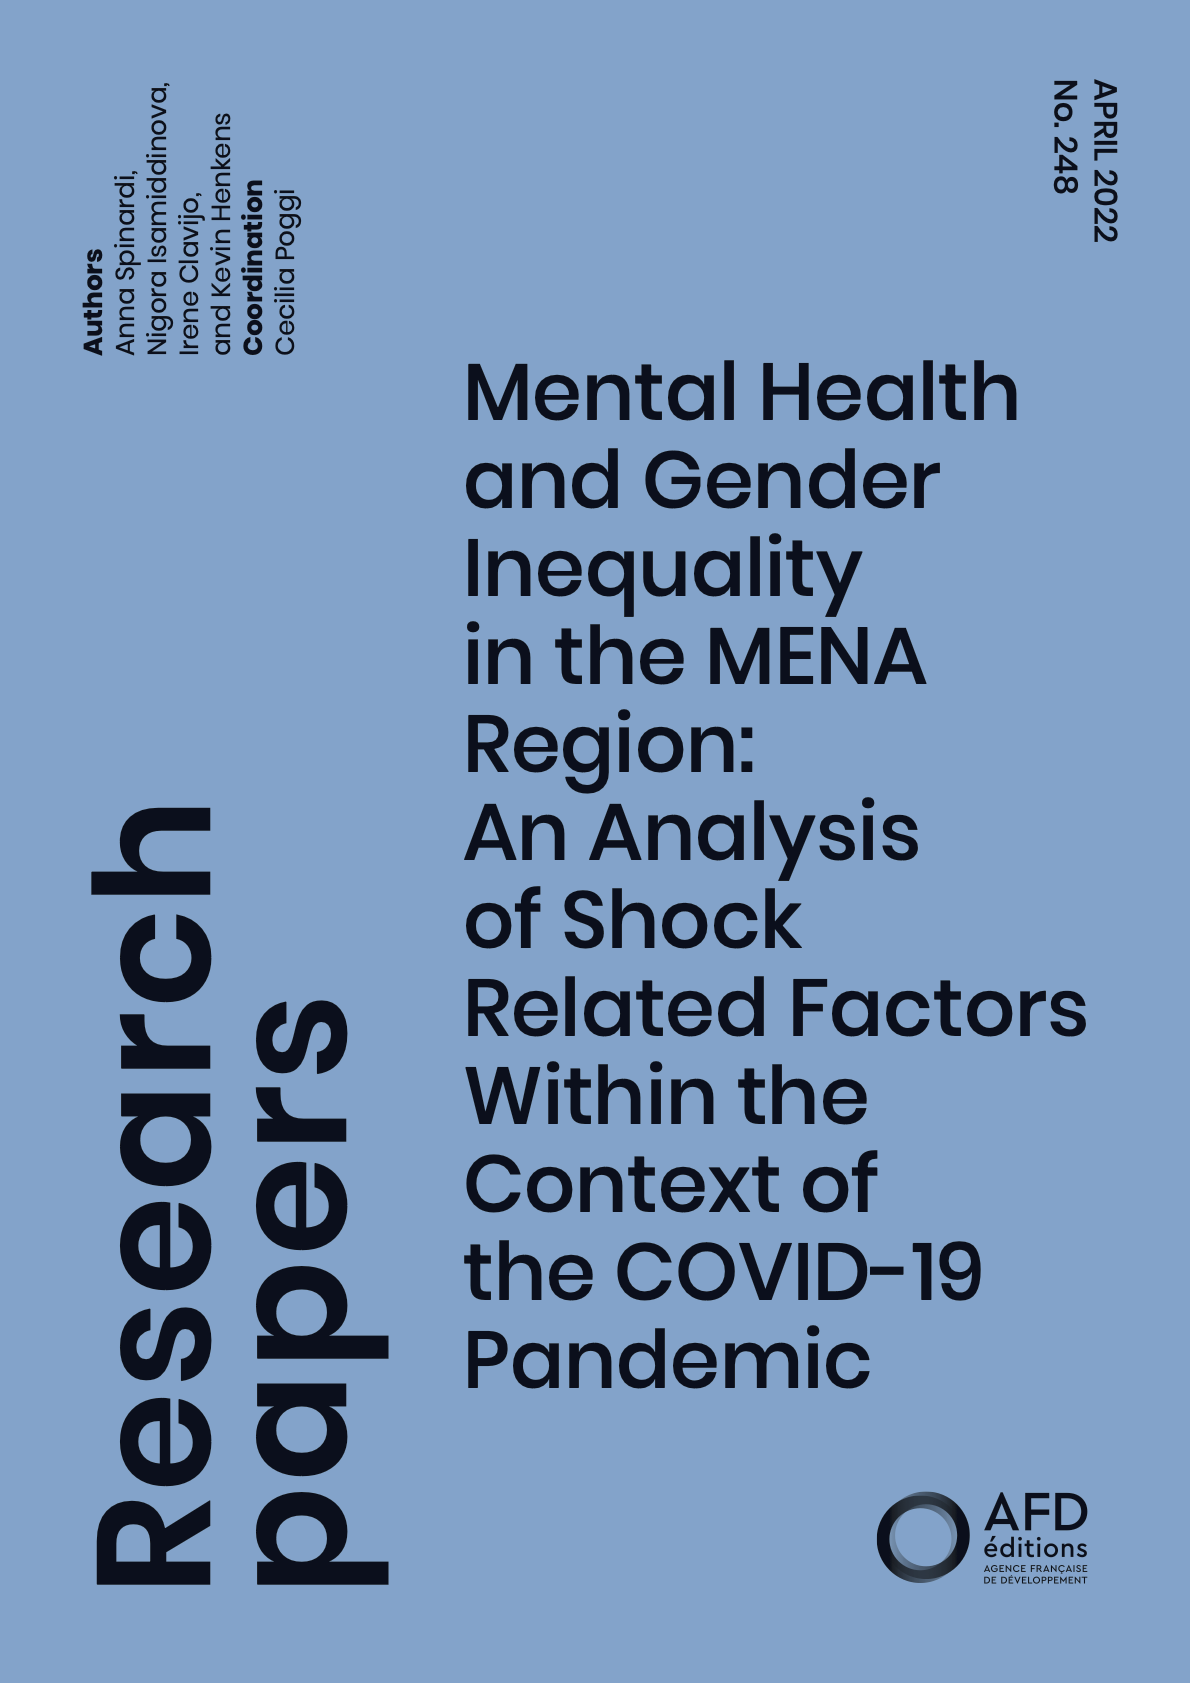 Mental Health and Gender Inequality in the MENA Region:  An Analysis of Shock Related Factors within the Context of the COVID-19 Pandemic